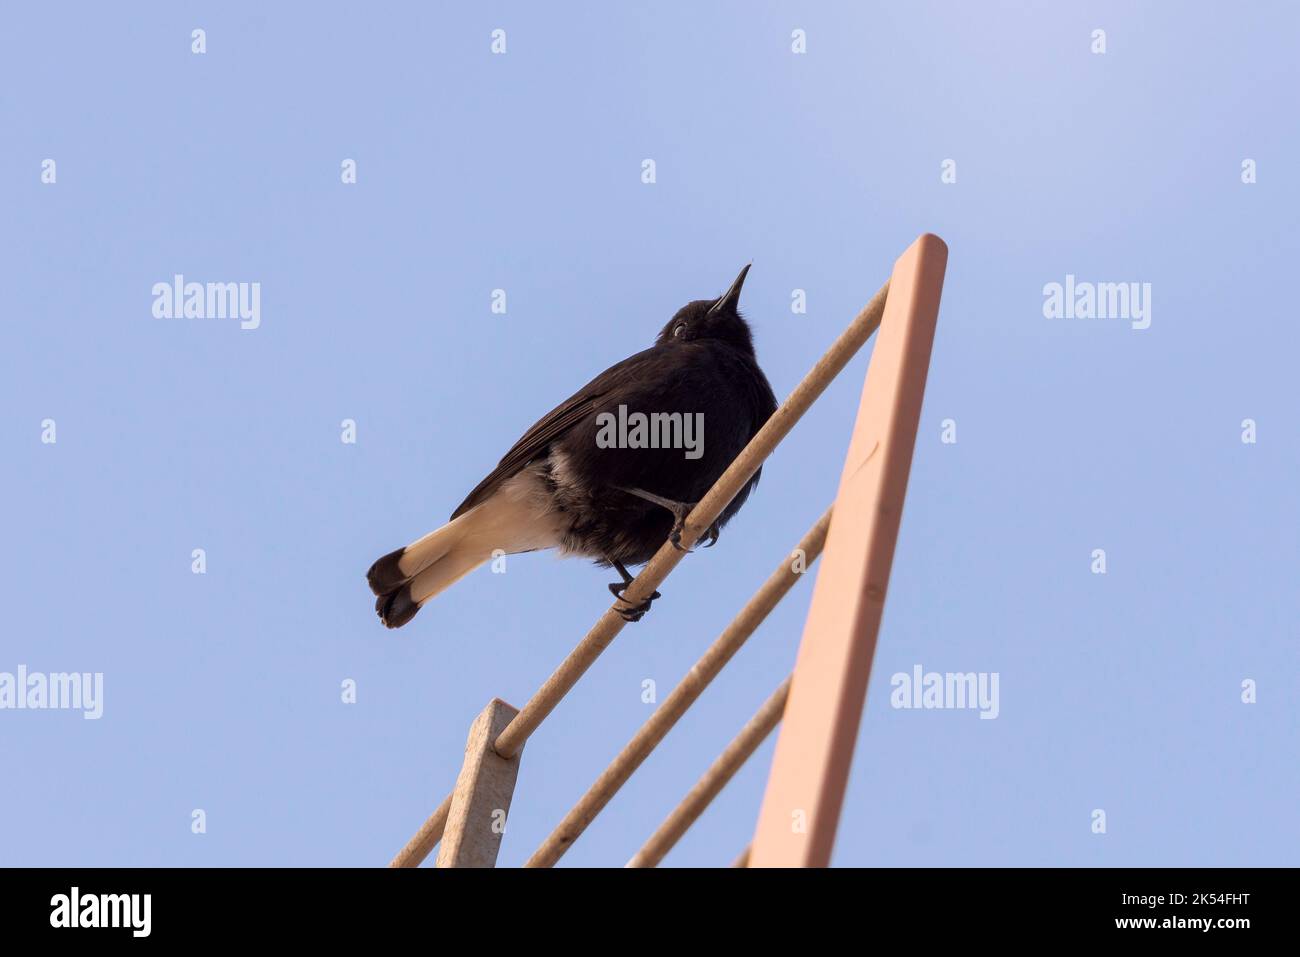 Black wheatear, Oenanthe leucura, perched on TV antenna. Photo taken in the province of Alicante, Spain Stock Photo